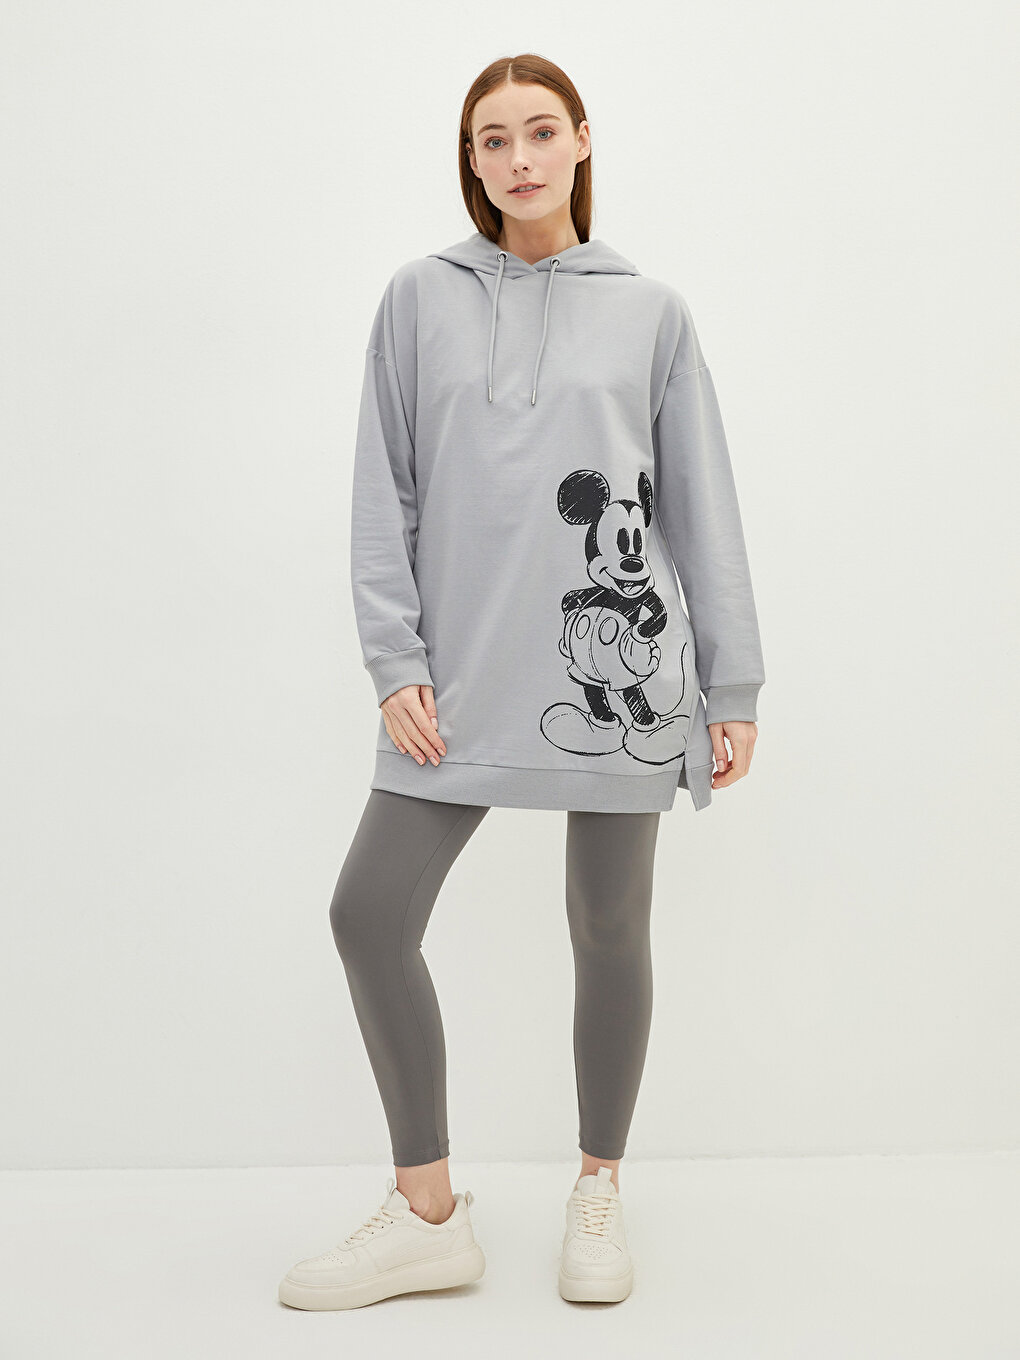 Cotton Leggings Grey Color Printed Leggings With Mickey Mouse